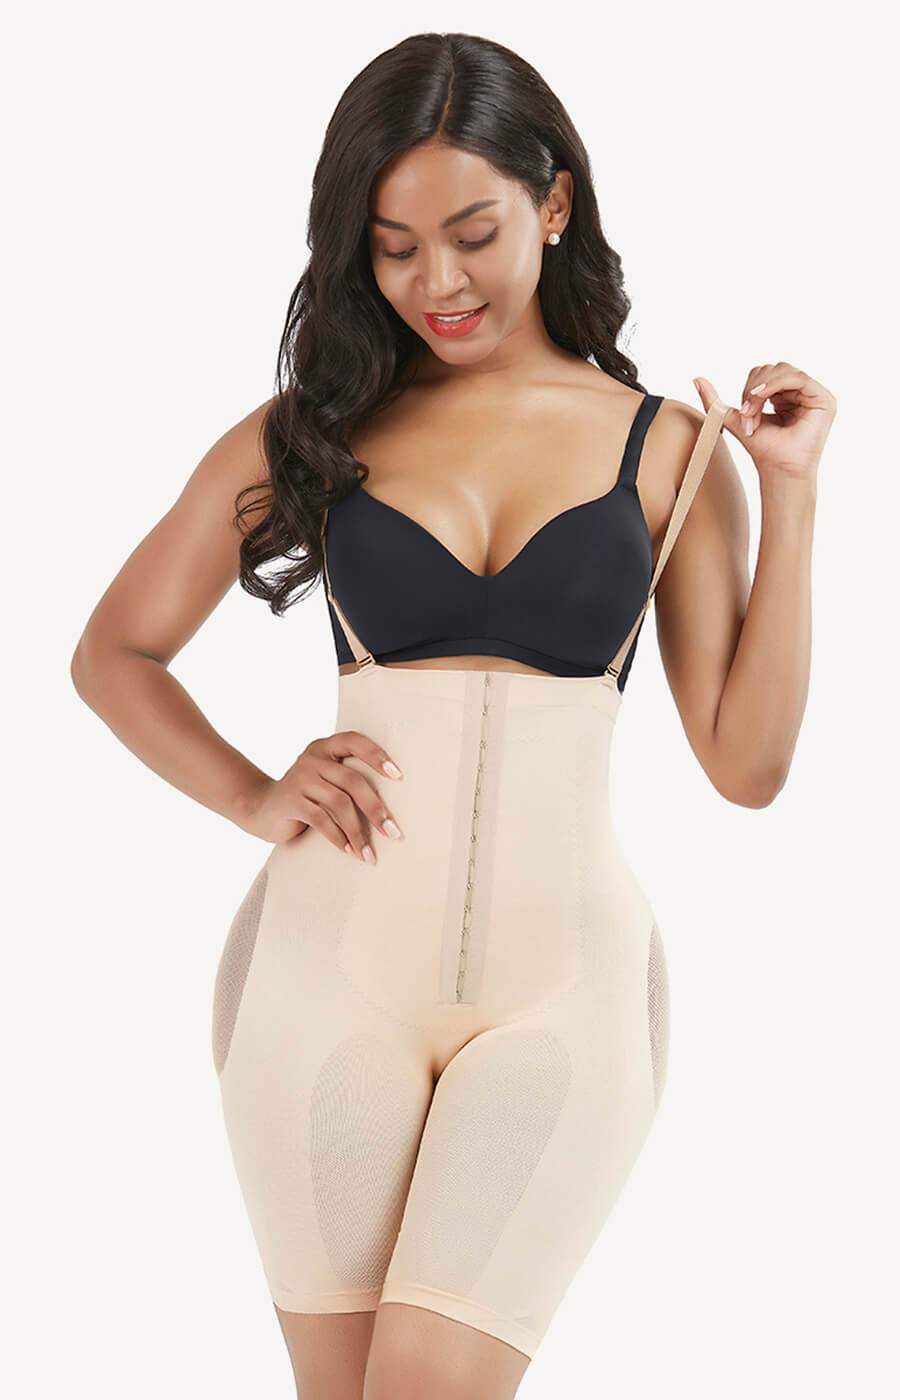 How To Choose The Best Body Shaper For Women According To Body Shape